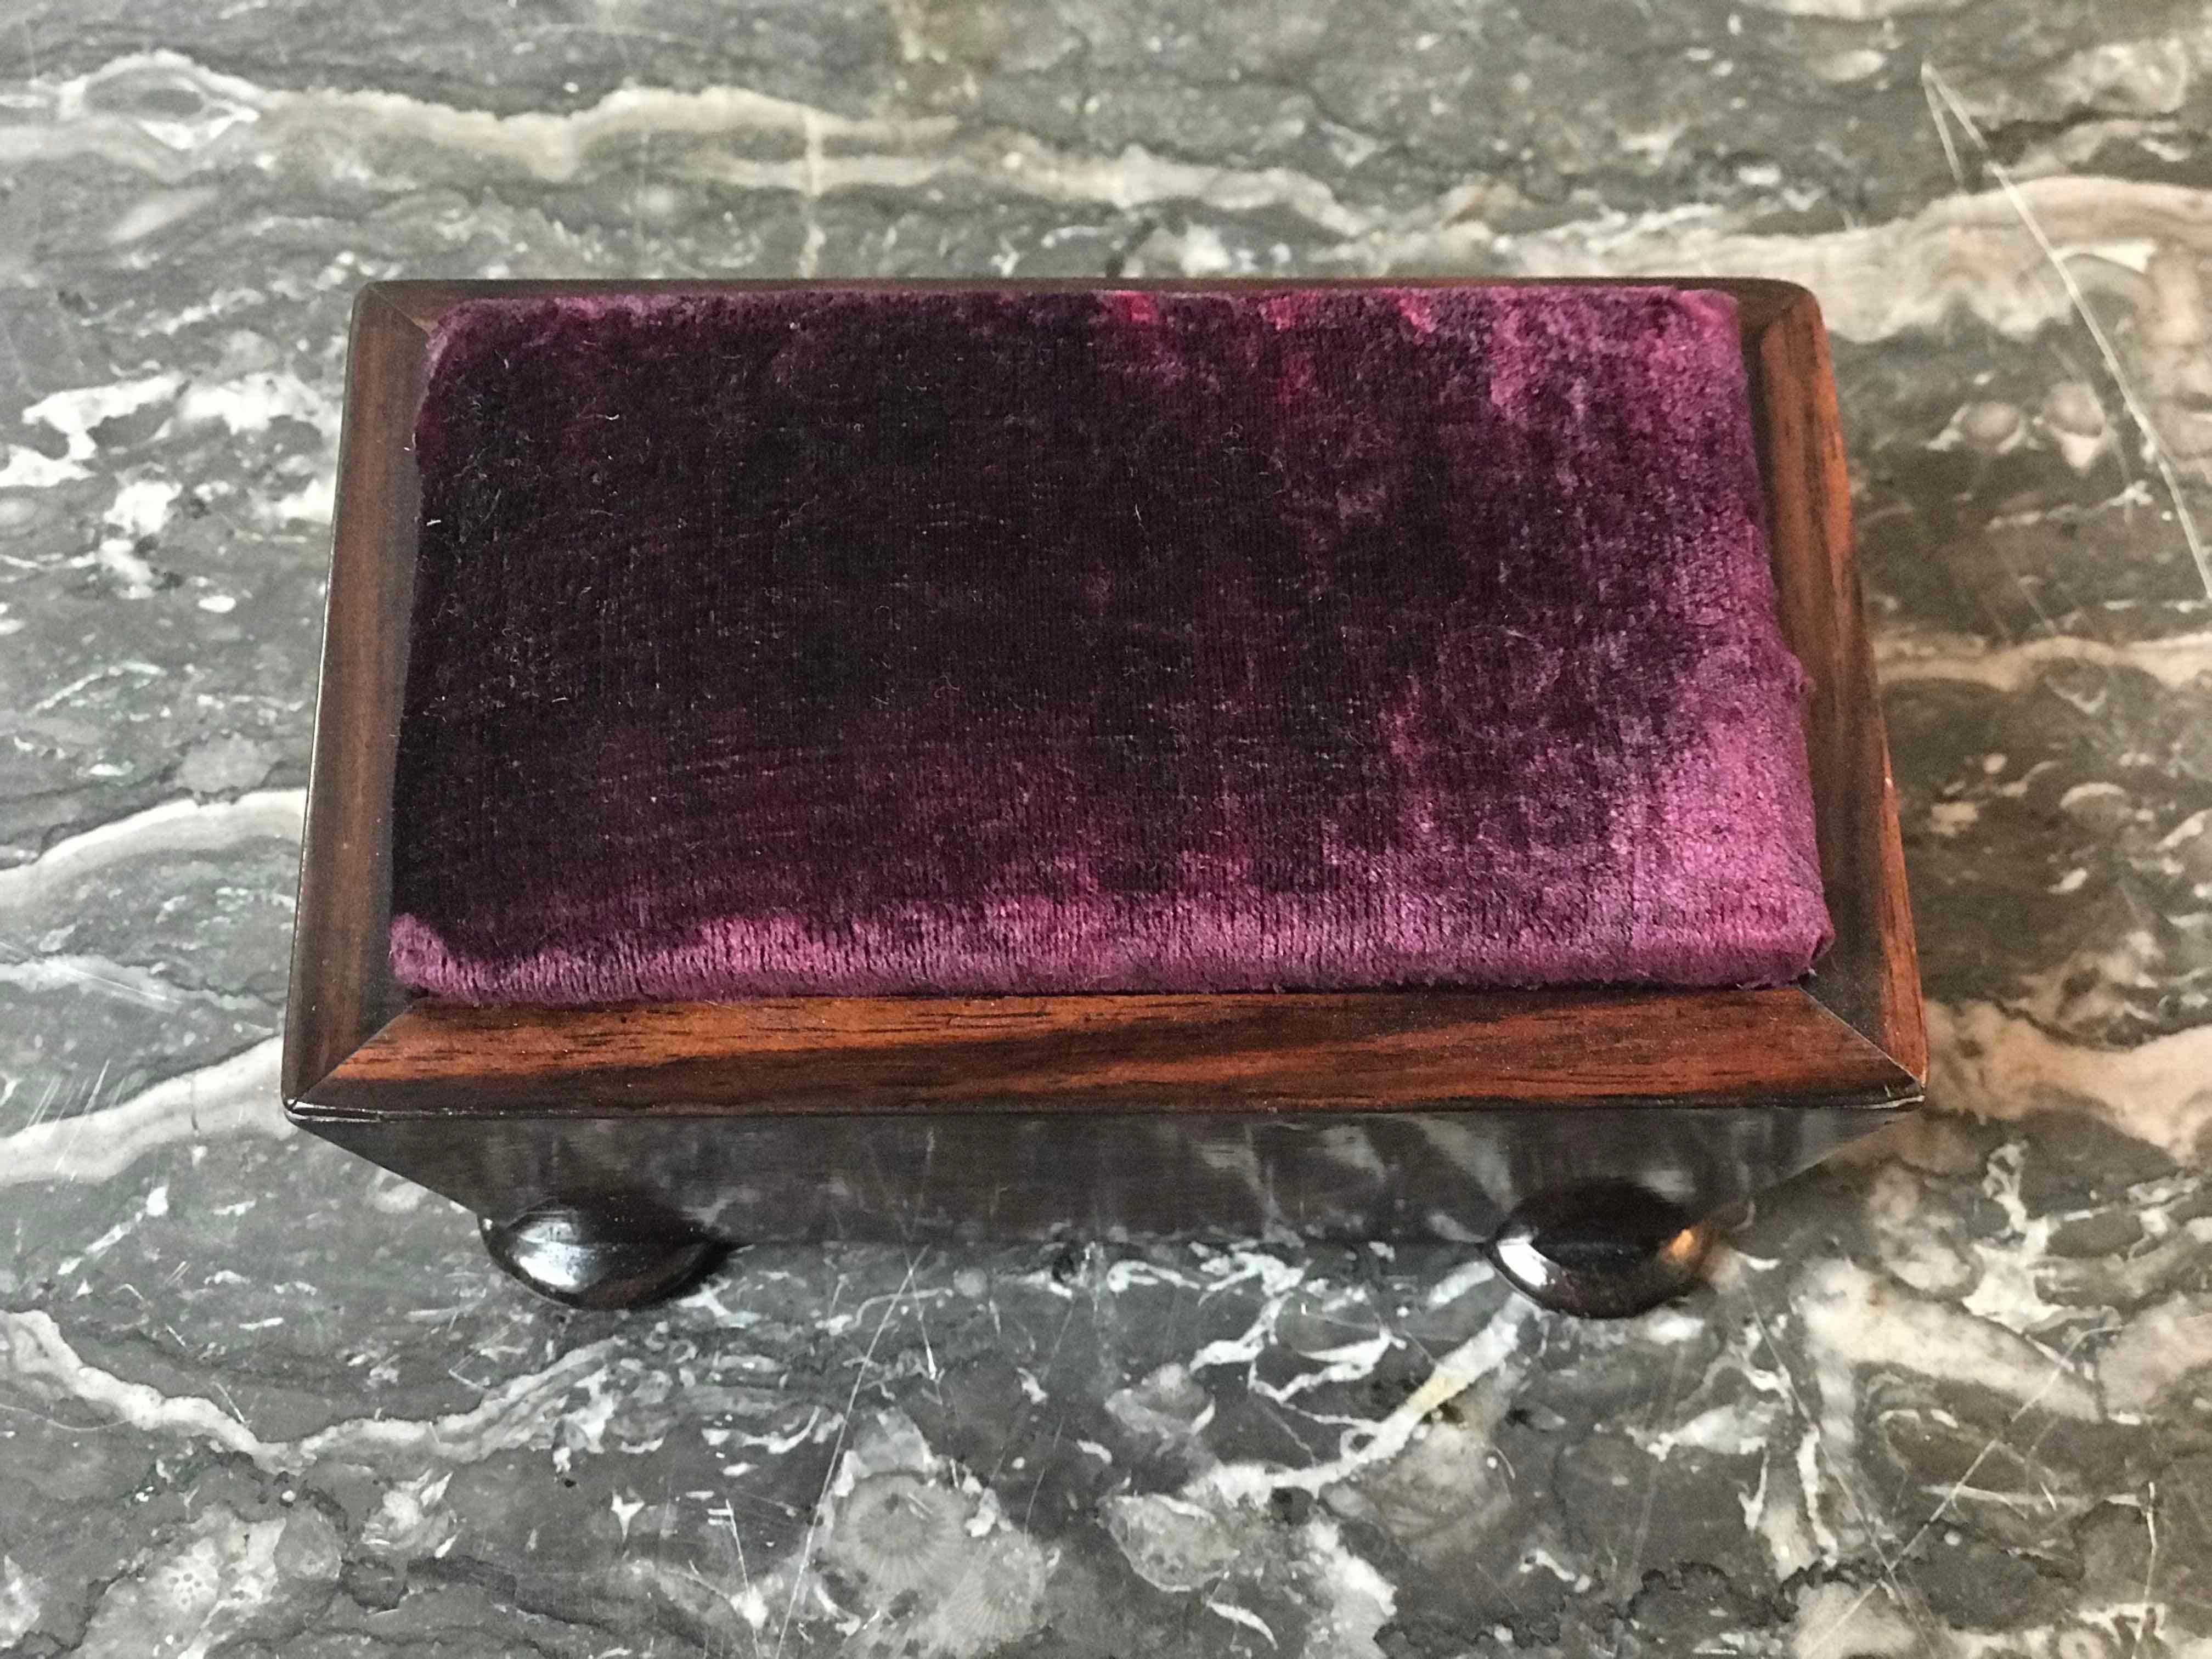 English Wooden Pin Cushion Box with Round Feet from Late 19th Century England